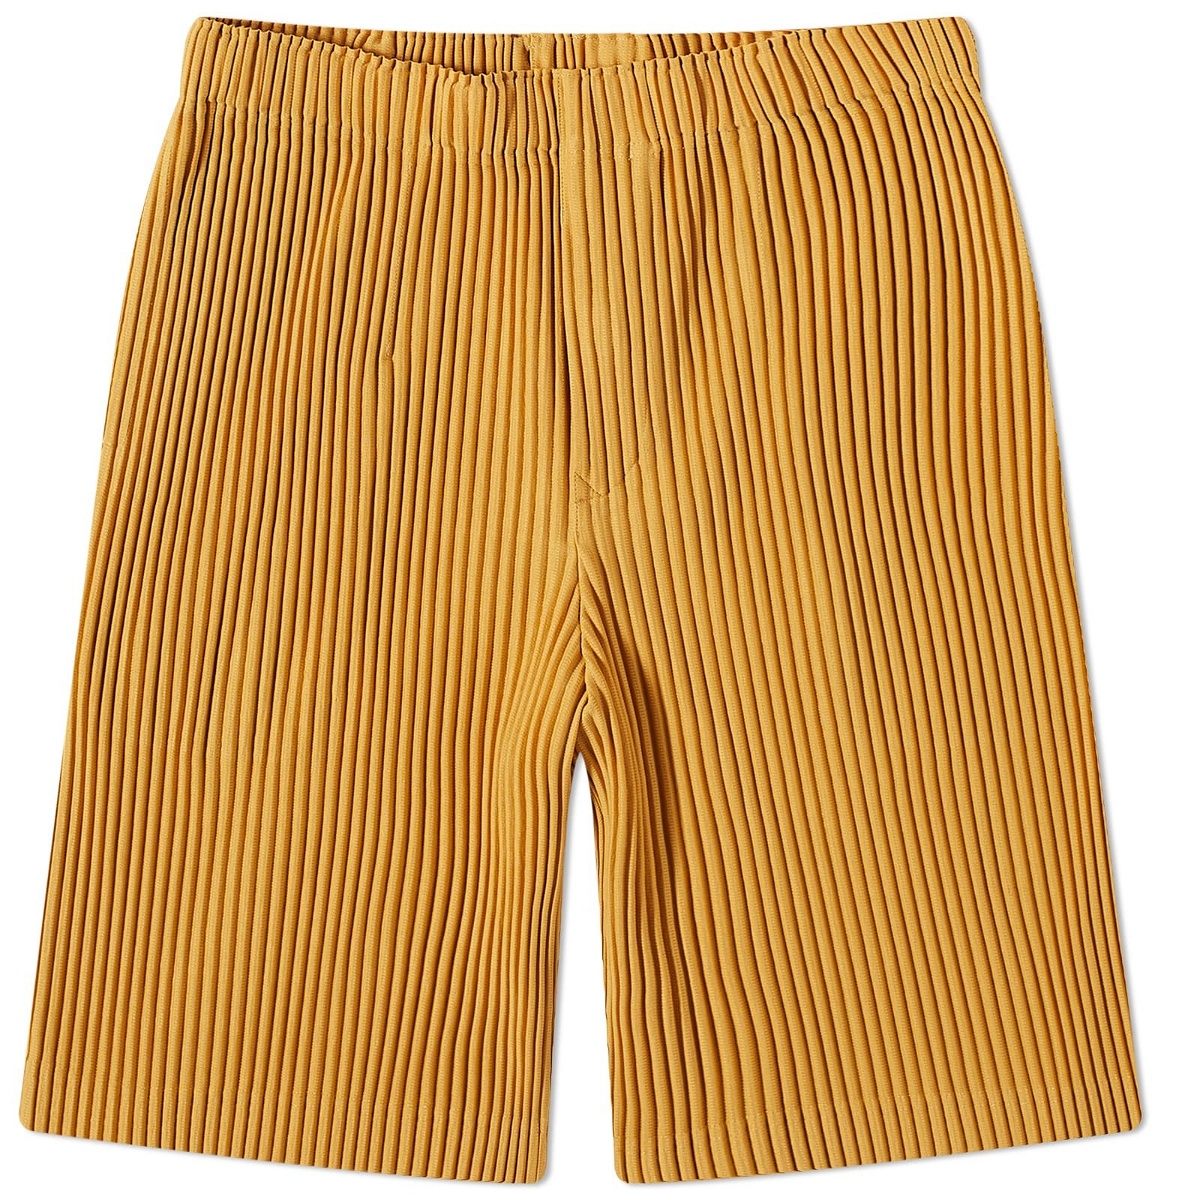 Homme Plissé Issey Miyake Men's Pleated Short in Golden Yellow Homme ...